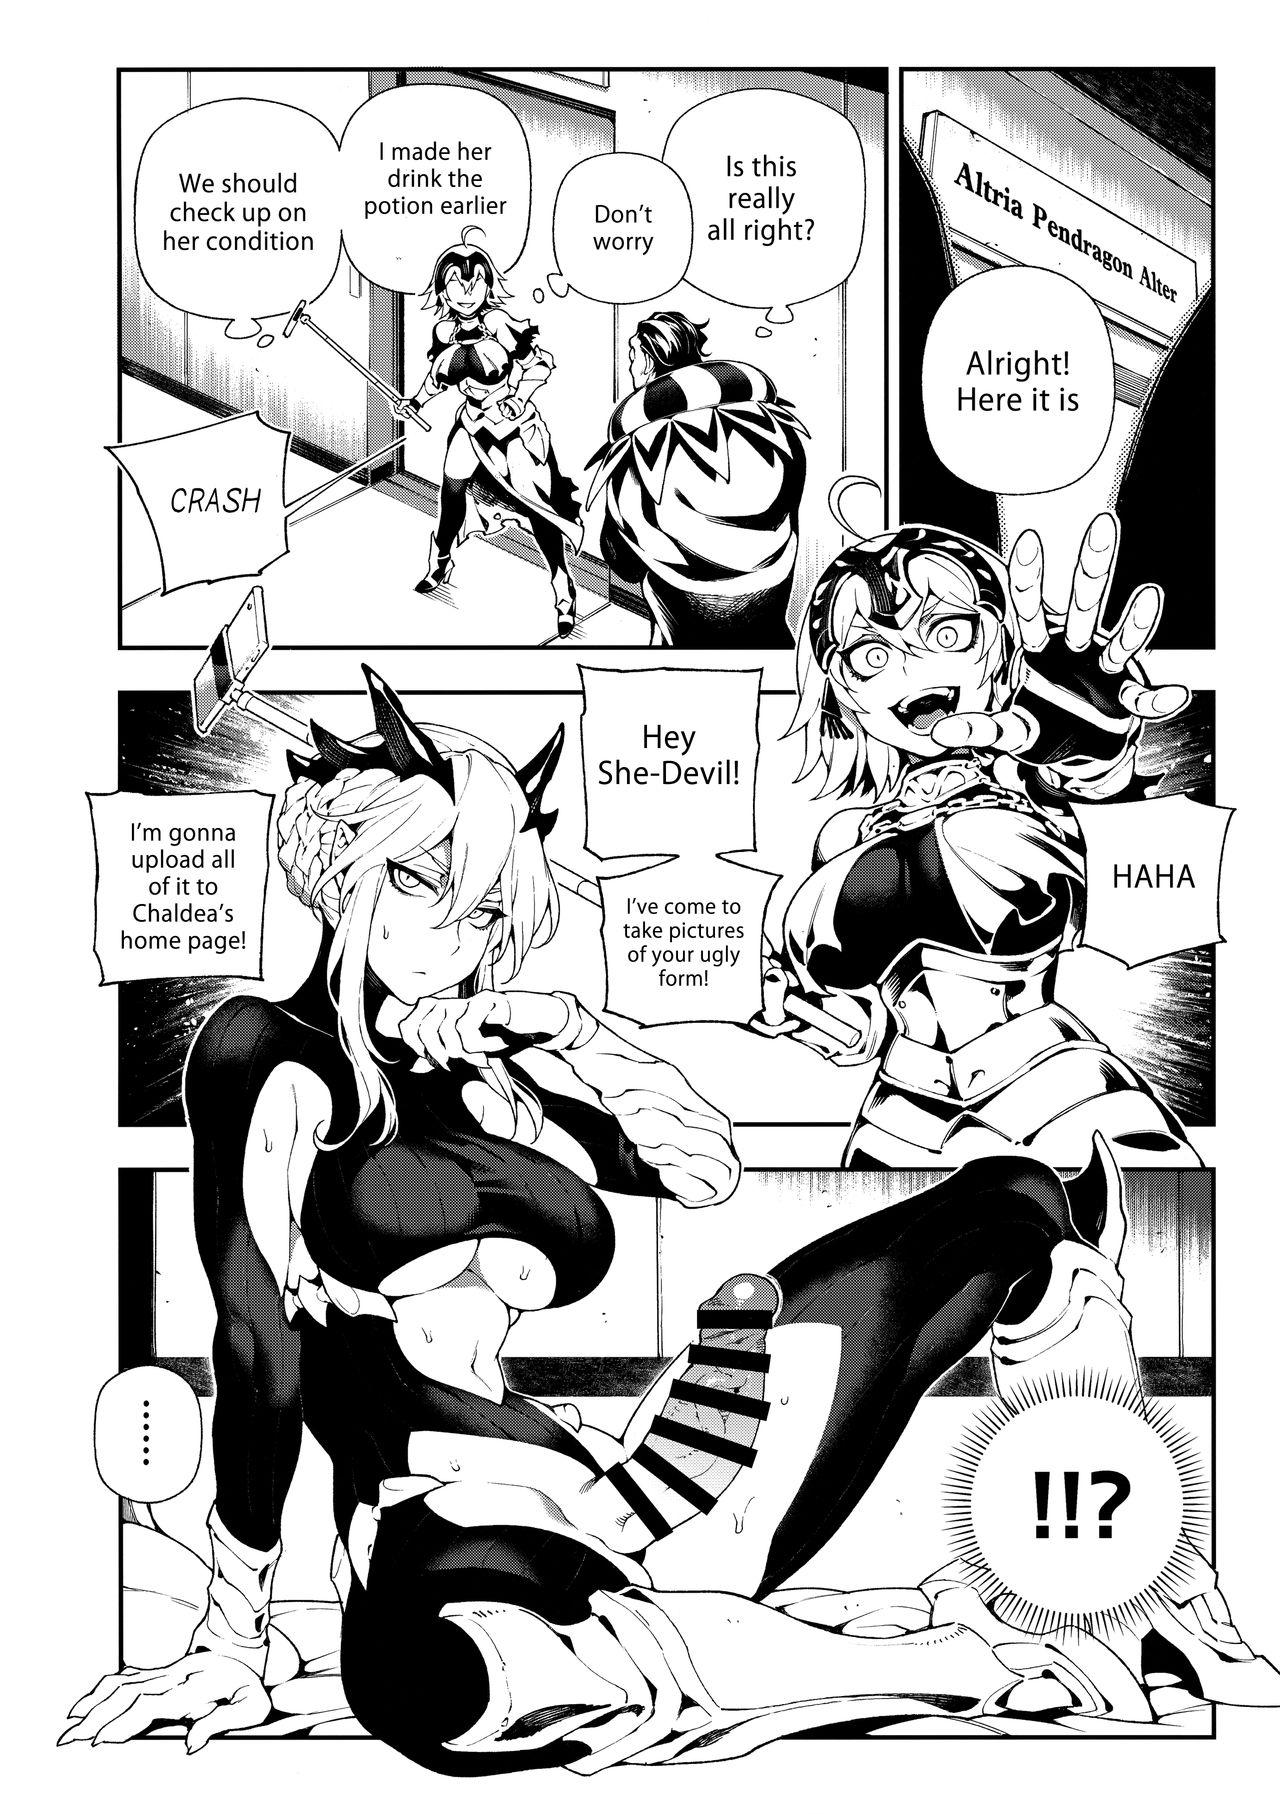 Australian CHALDEA MANIA - Jeanne Alter - Fate grand order Gay Pawn - Page 5